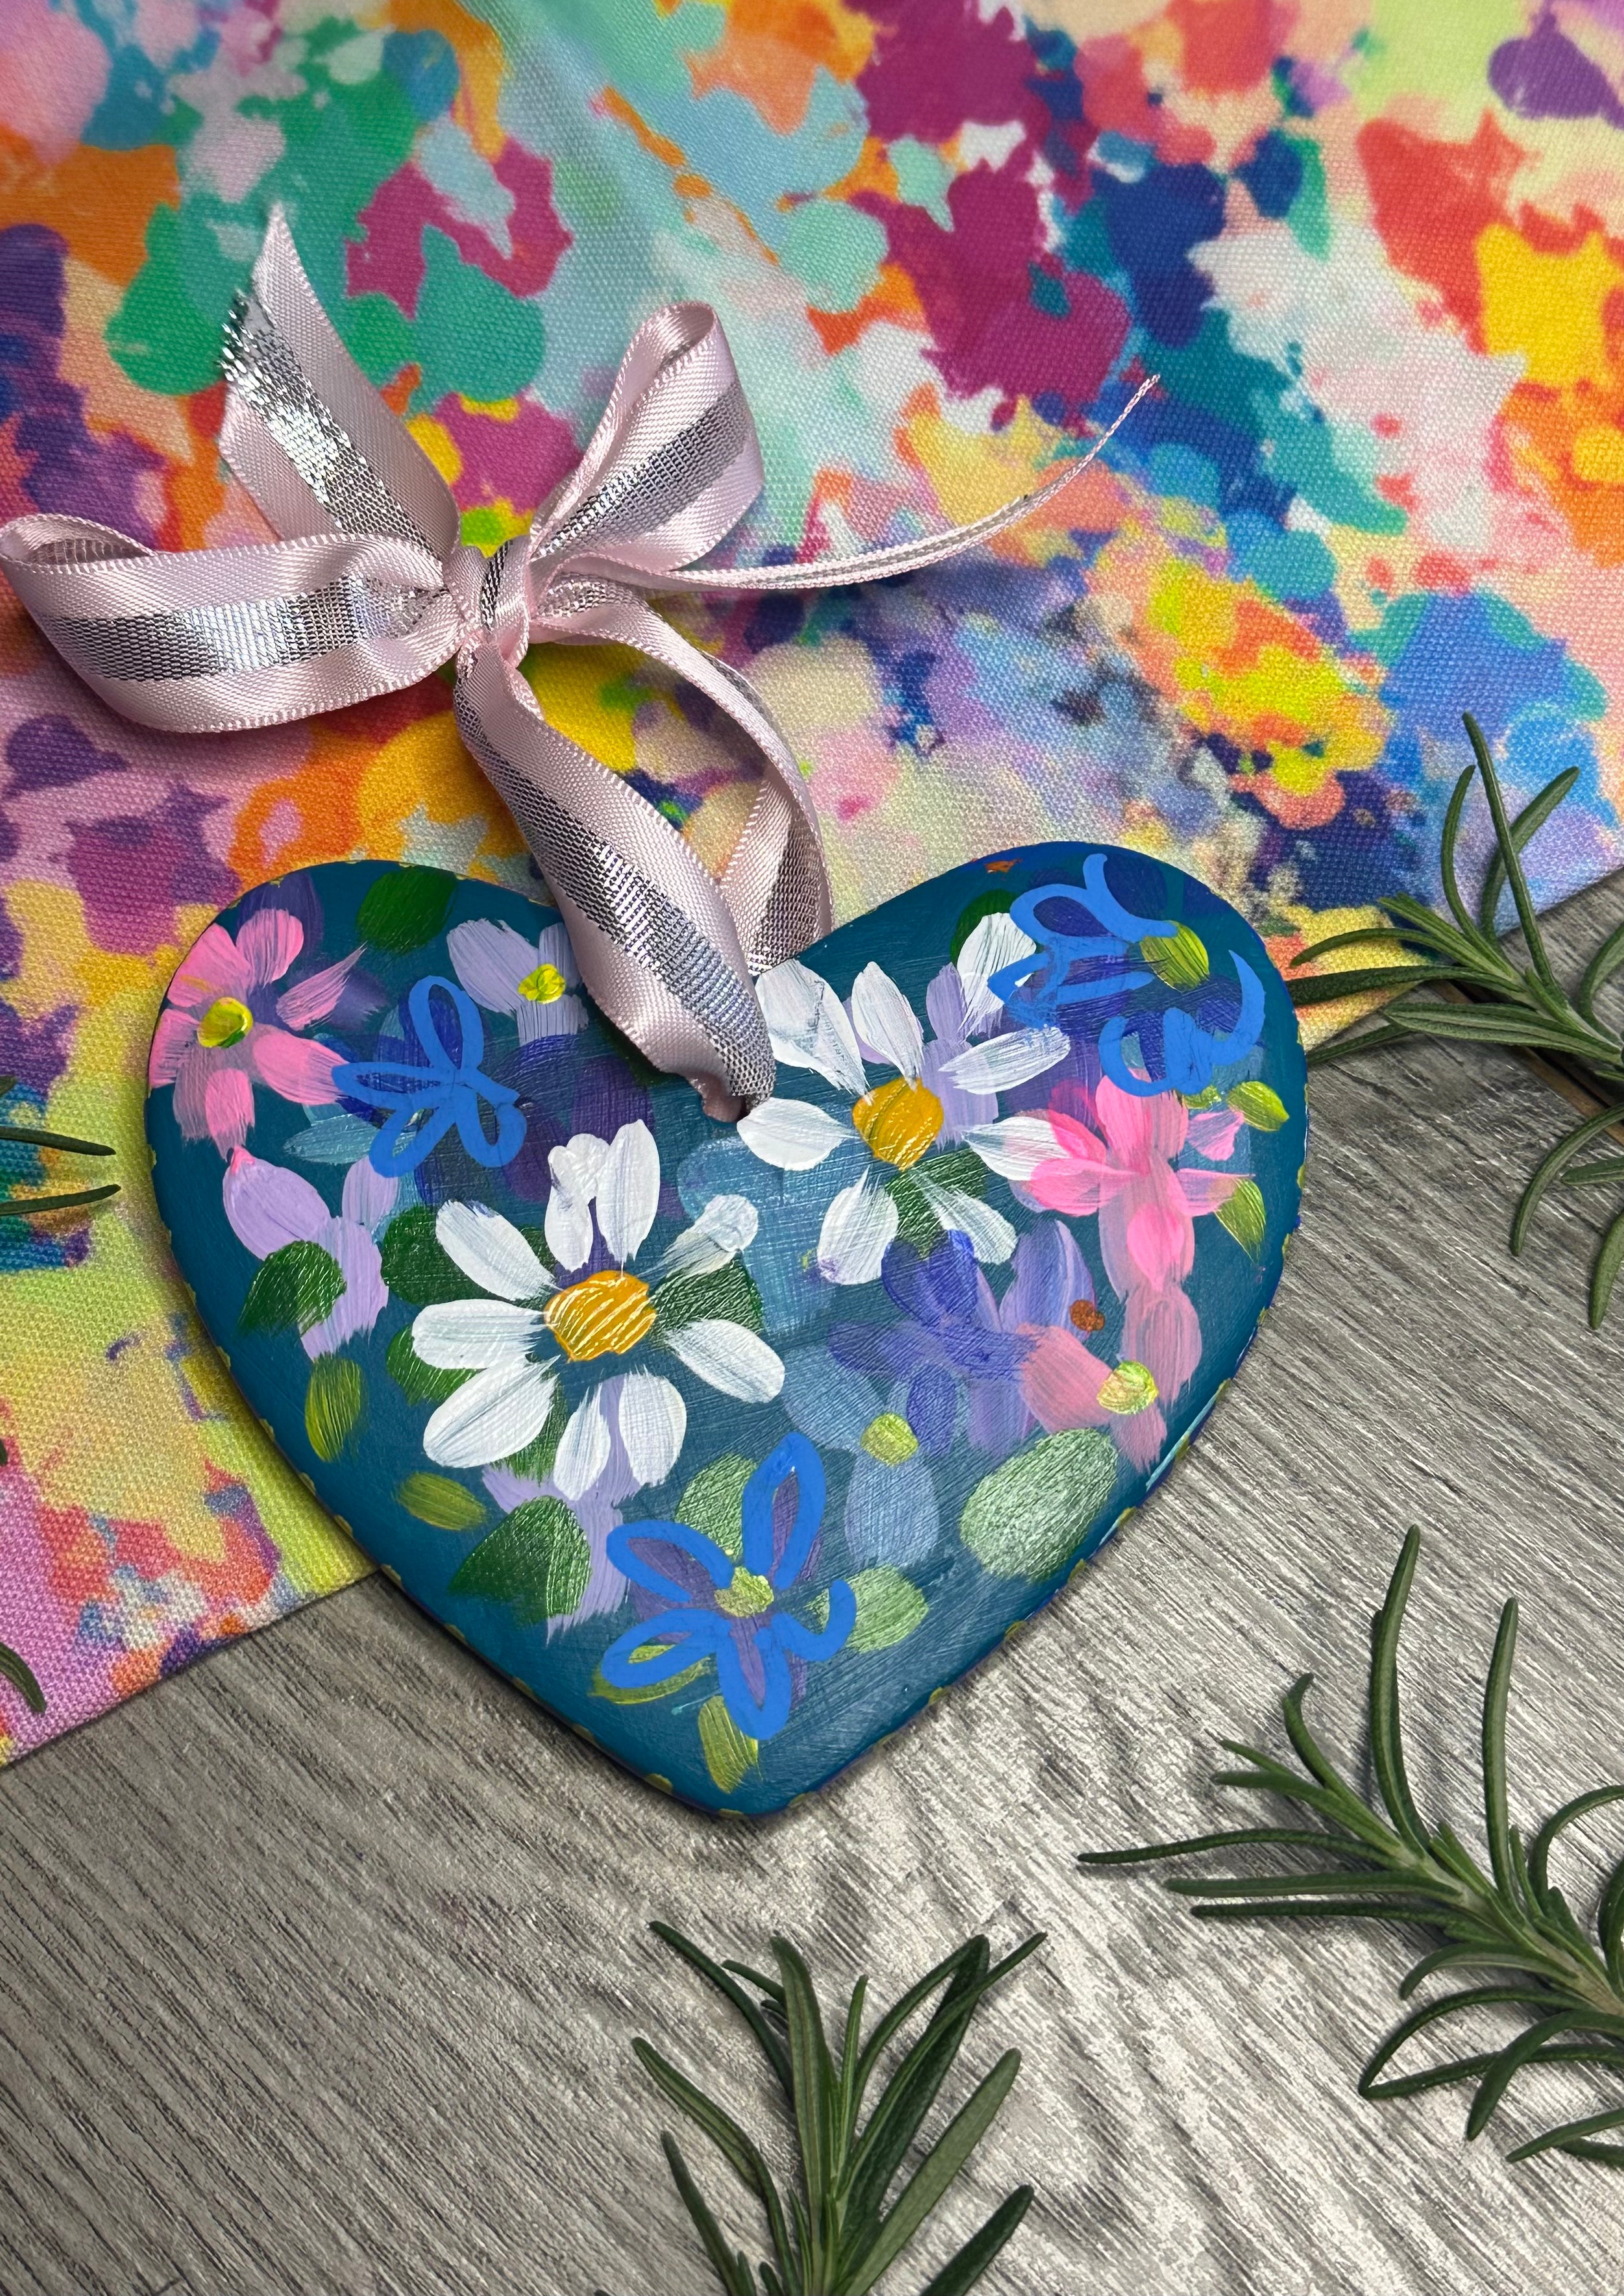 Teal Floral  Handpainted Heart Christmas Ornament